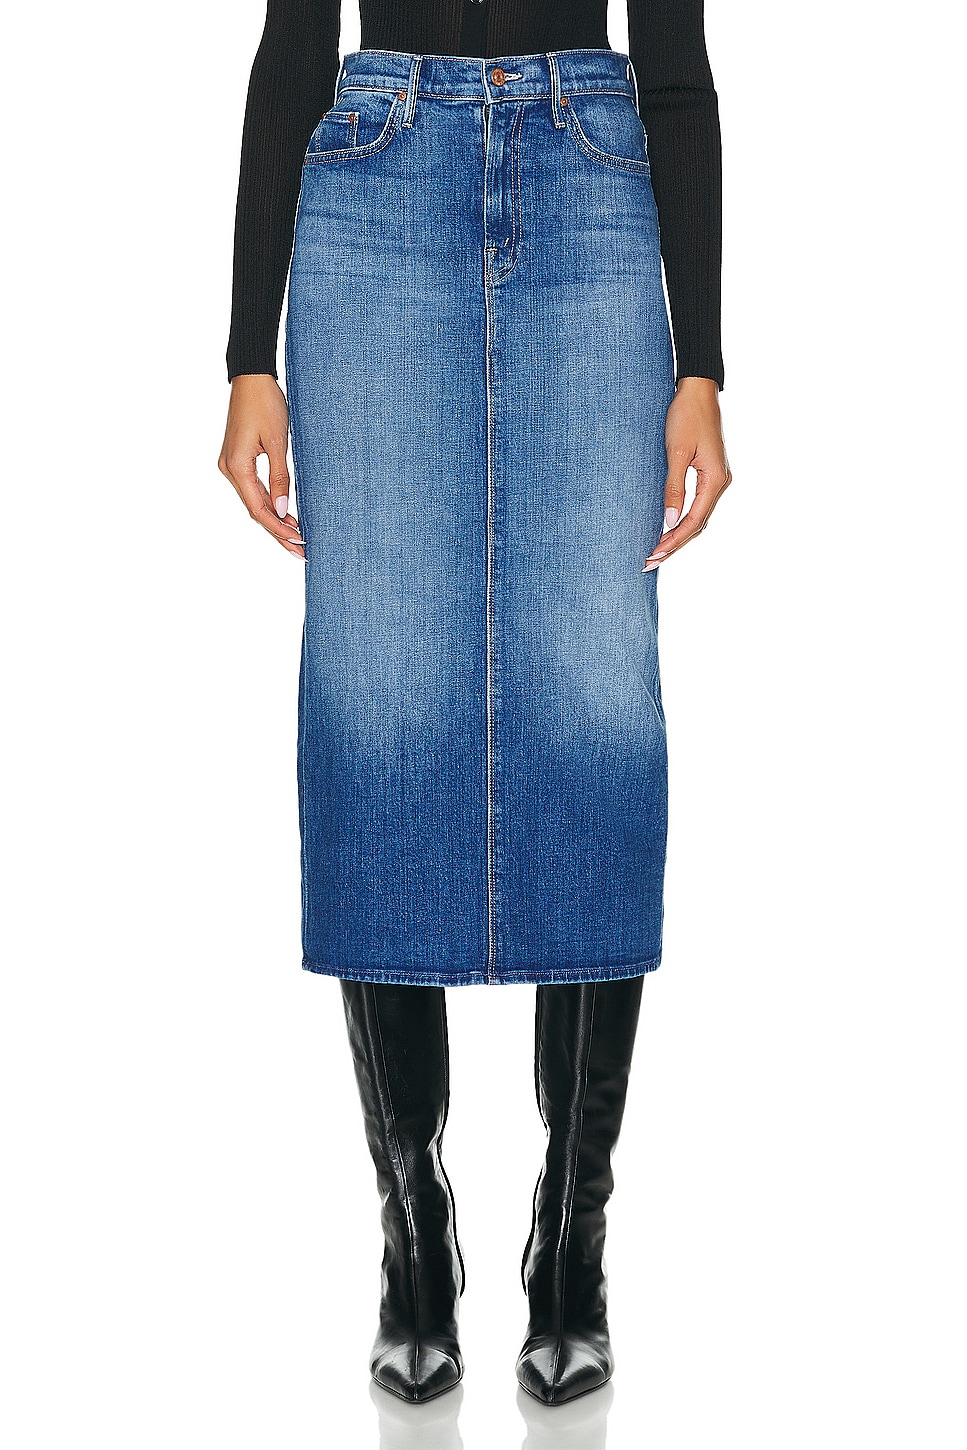 The Pencil Pusher Skirt in Blue